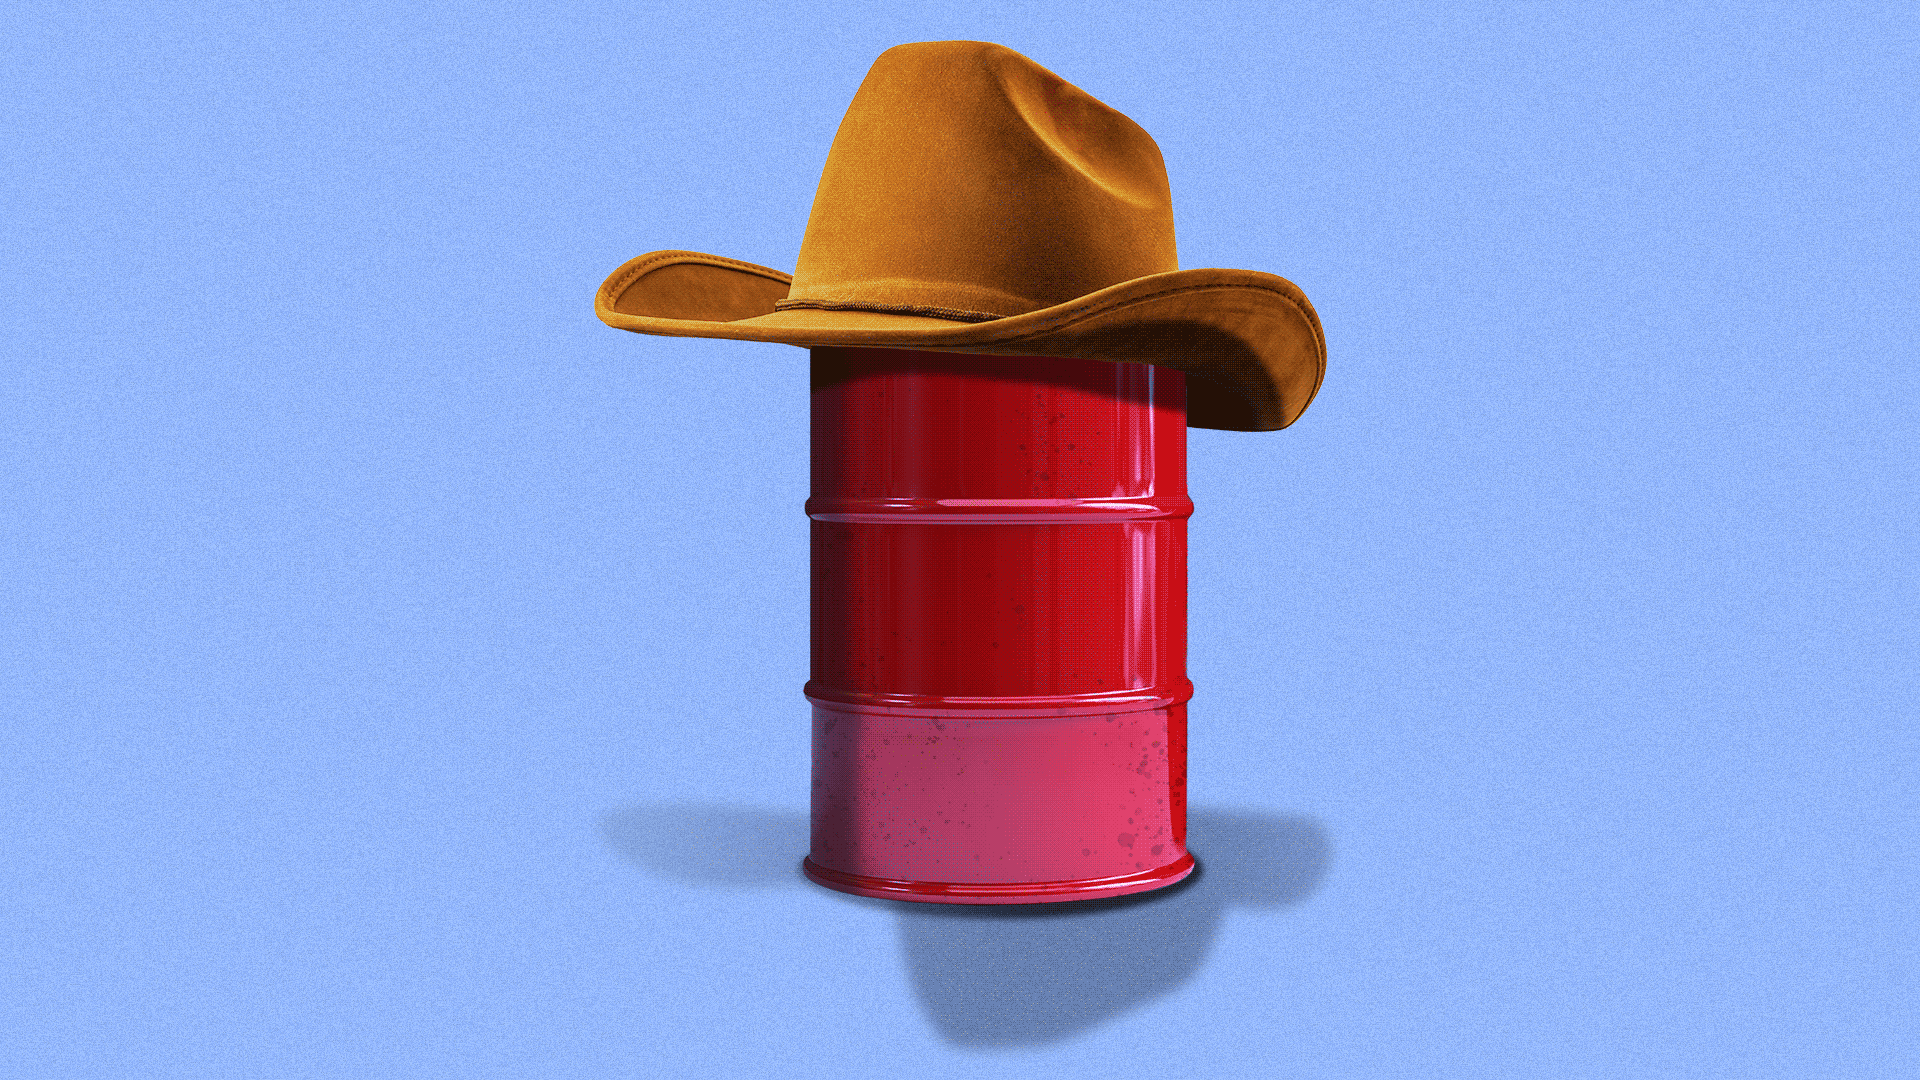 Animated gif of an oil barrel disappearing under a cowboy hat